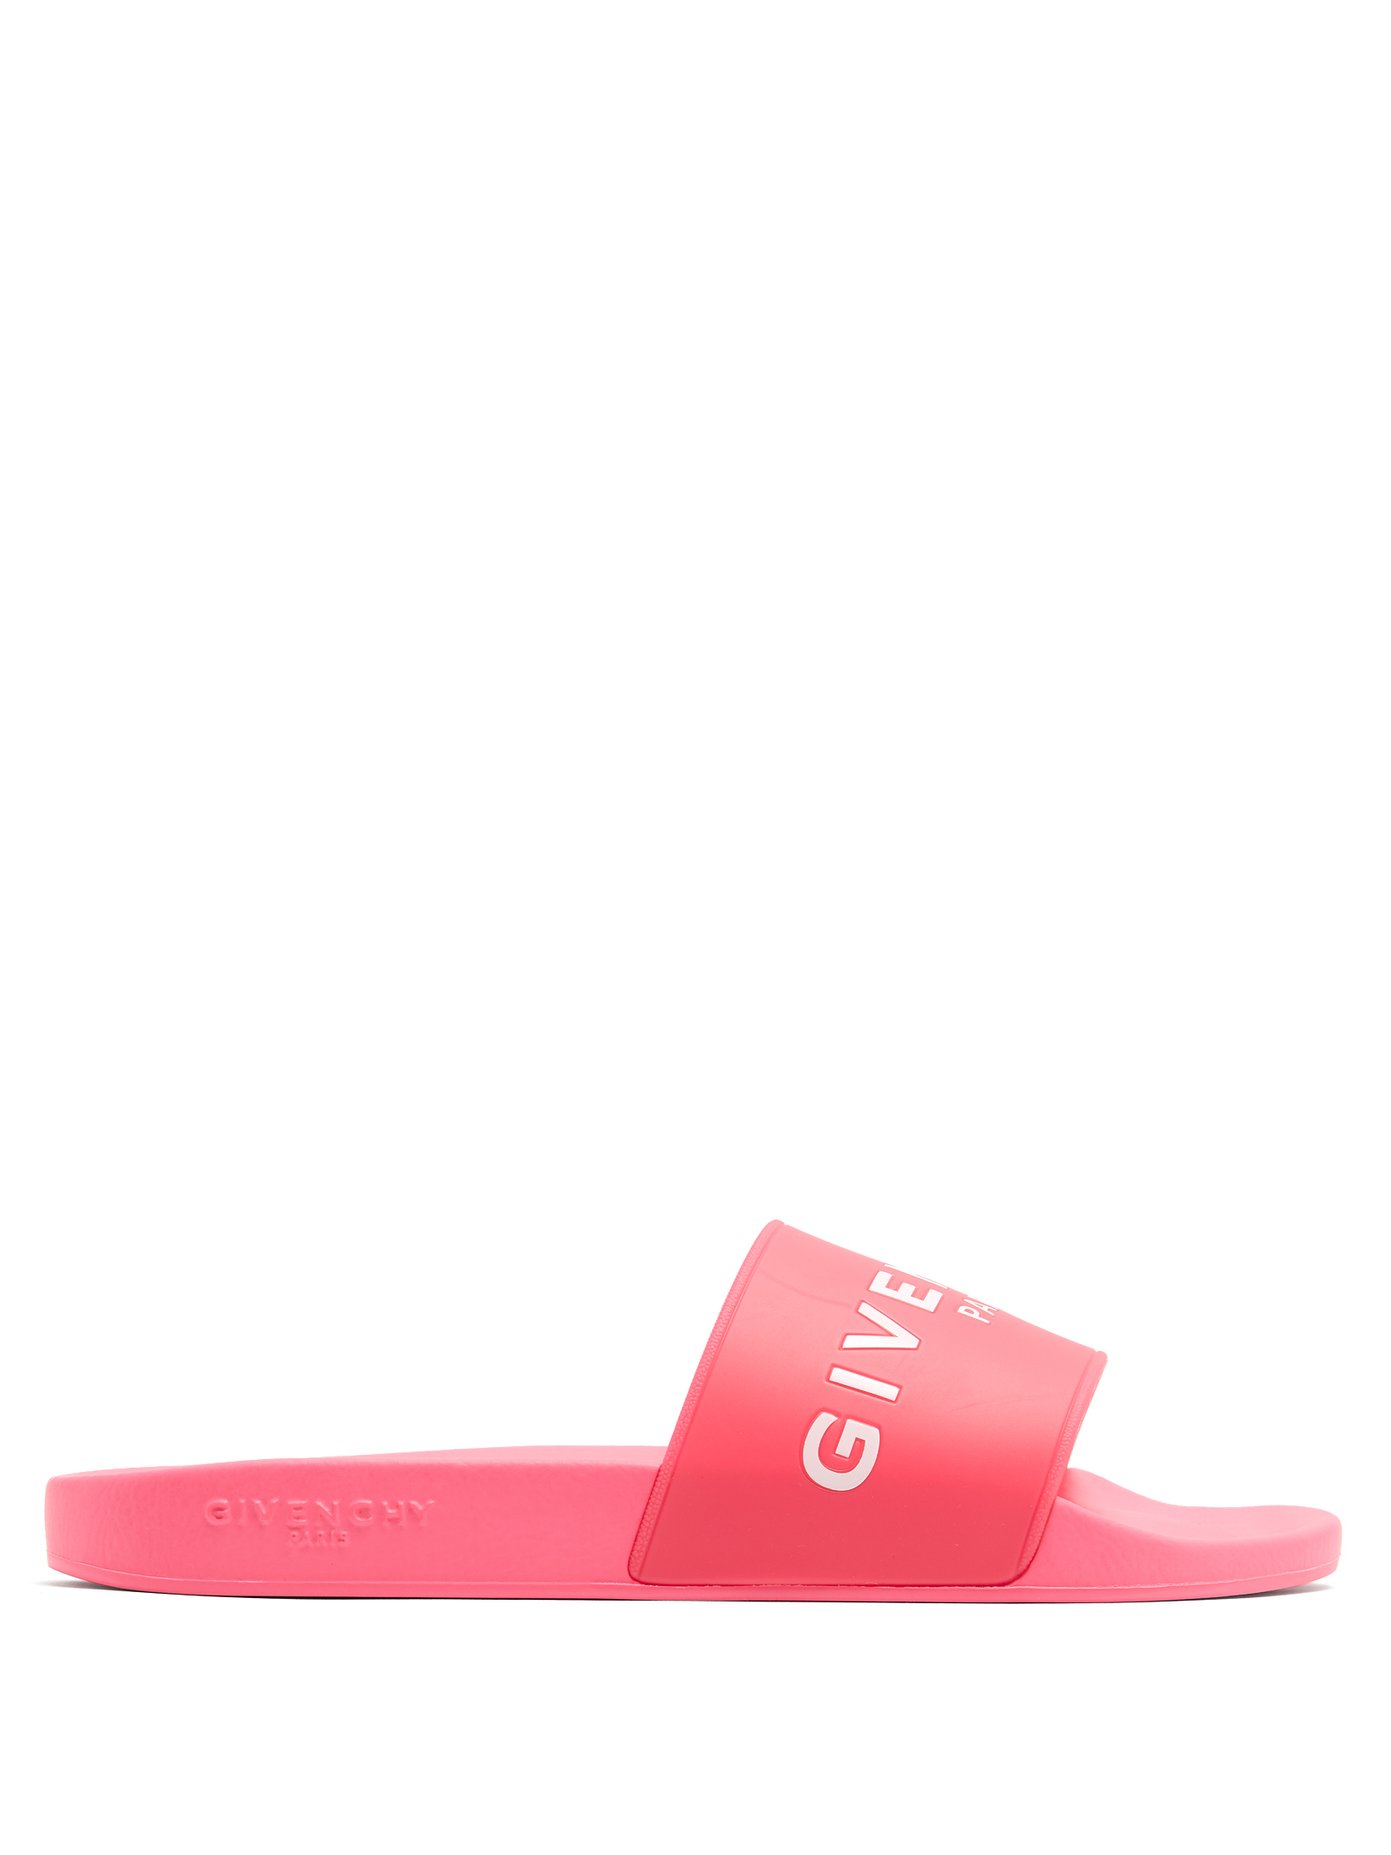 Rubber pool slides | Givenchy 